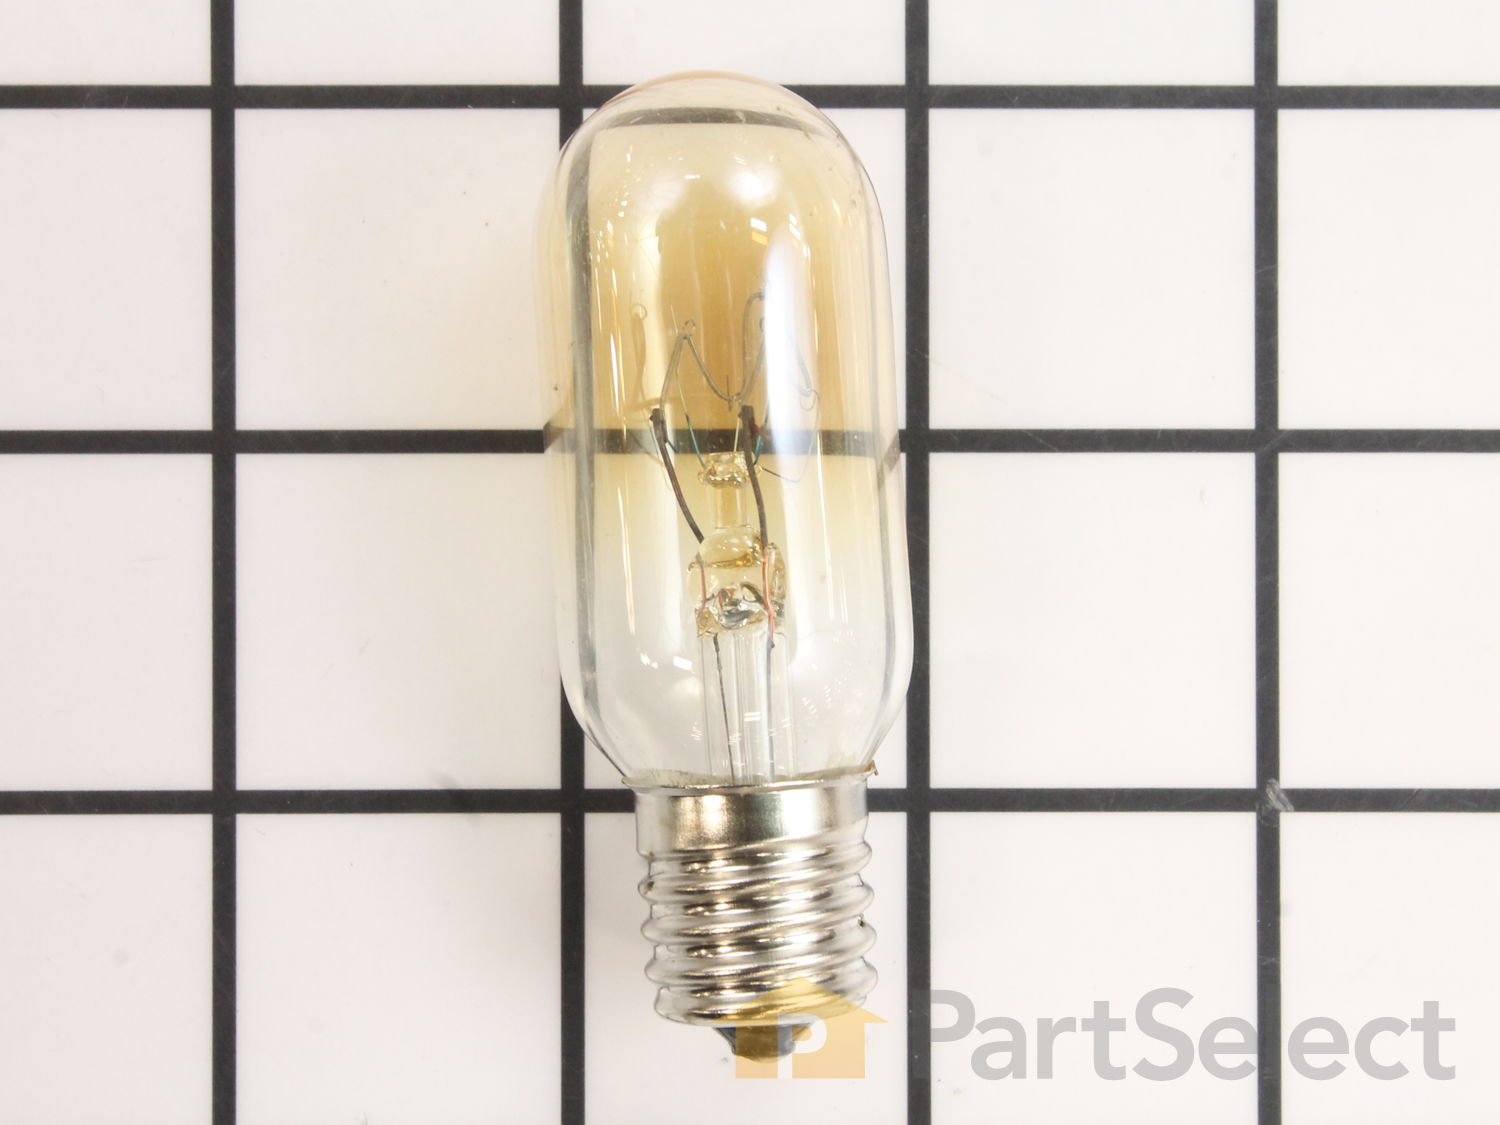 3 General Electric GE Microwave Light Bulb Lamp 40 Watt 130 Volts Replacement 